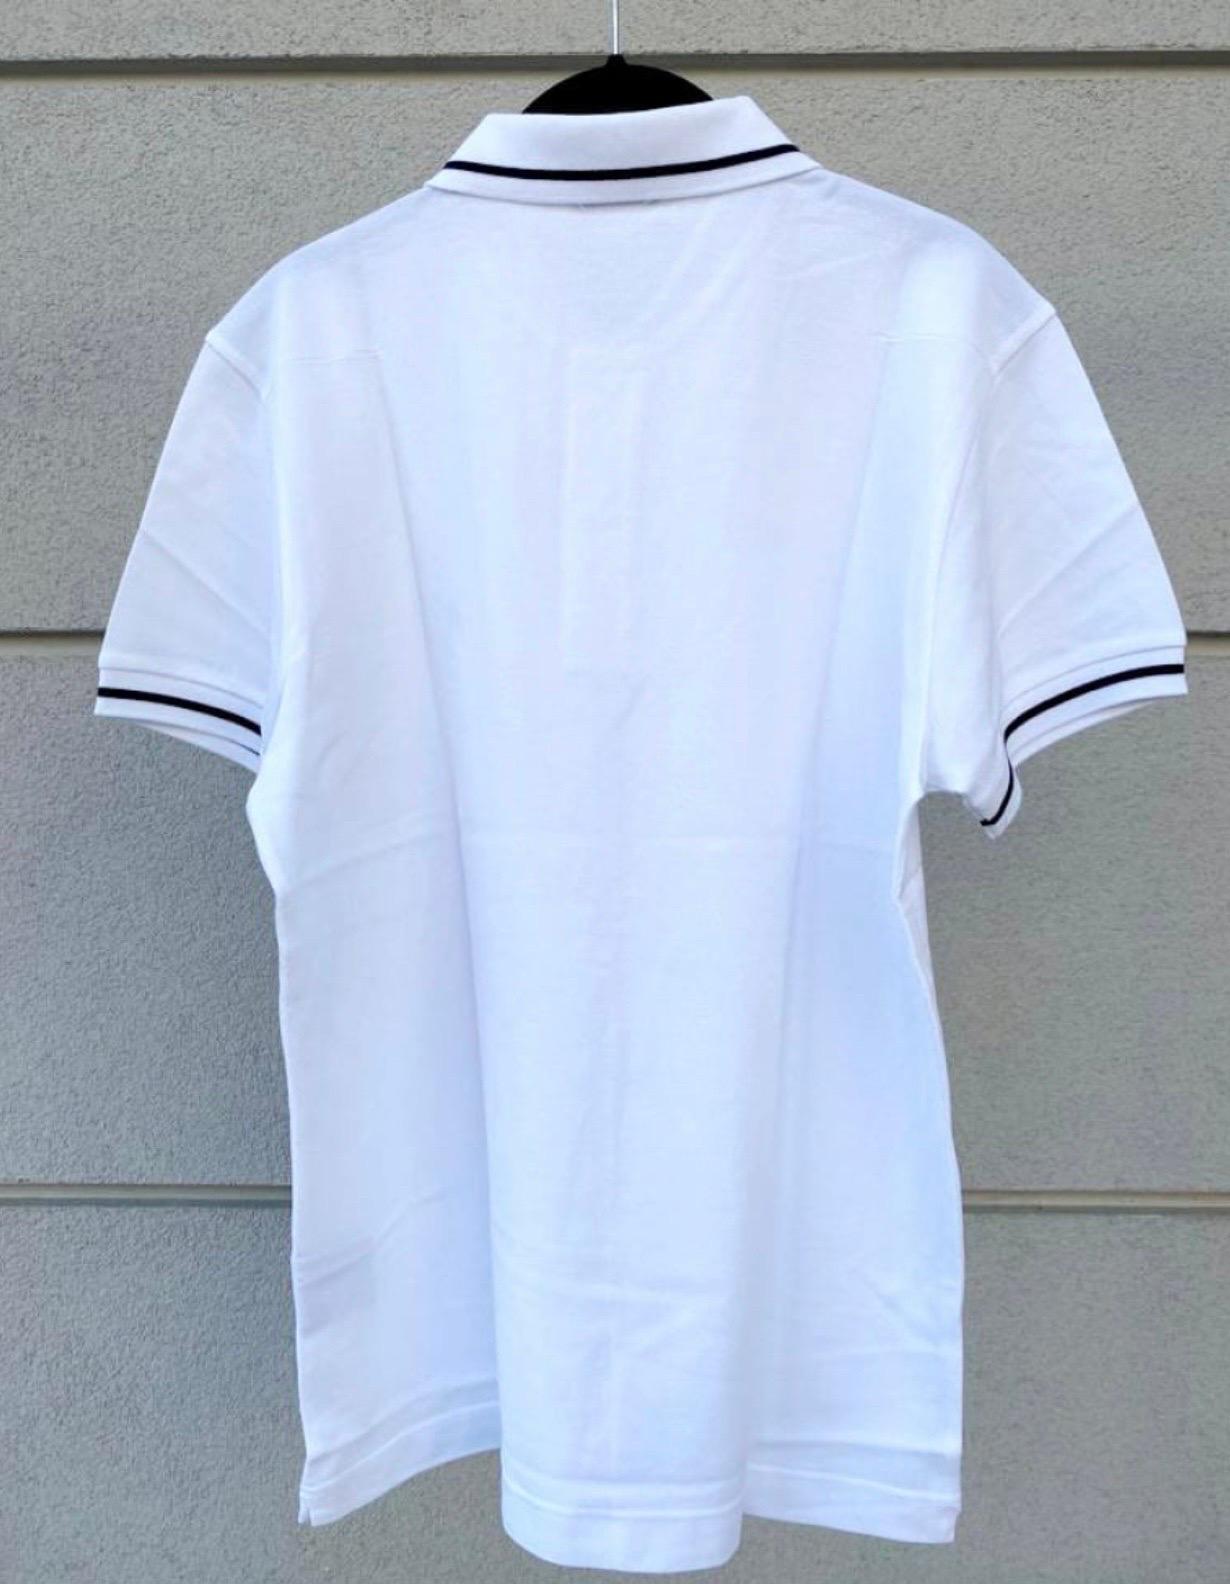 Dior polo t-shirt. 
100% white cotton.
Featuring a small bee detail and short sleeves.
Size L. Measurements: shoulders 45 cm, bust 51 cm, length 75 cm, sleeve 20 cm.
Perfect, good as new.
Born as man T-shirt but it can be worn by both genres.